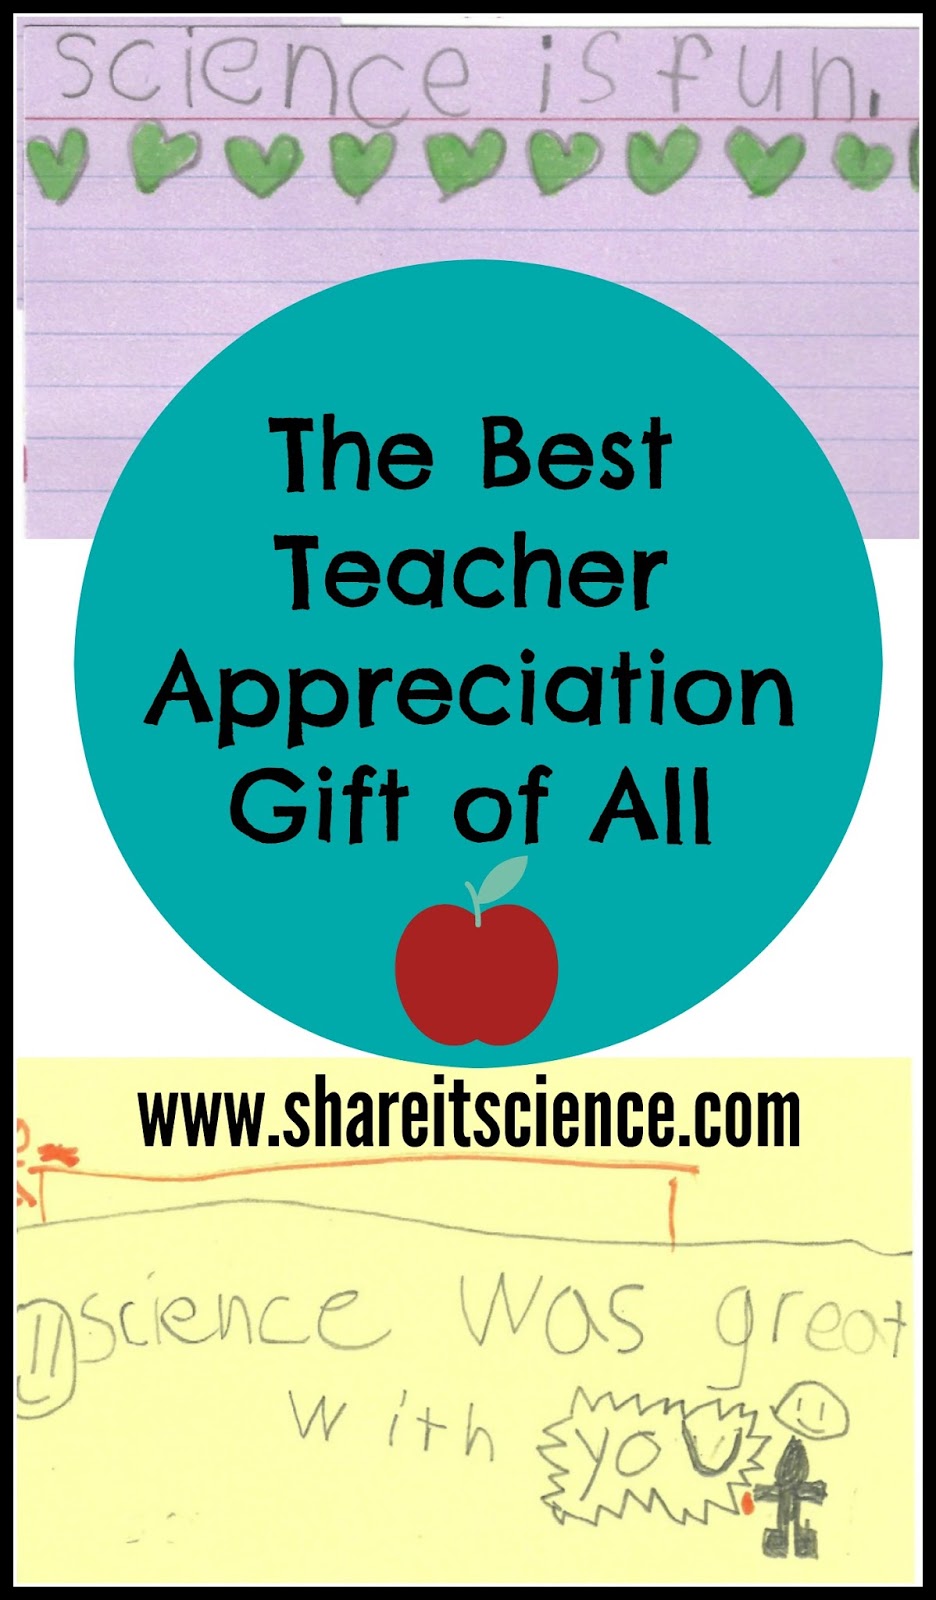 share-it-science-teacher-appreciation-day-the-best-gift-of-all